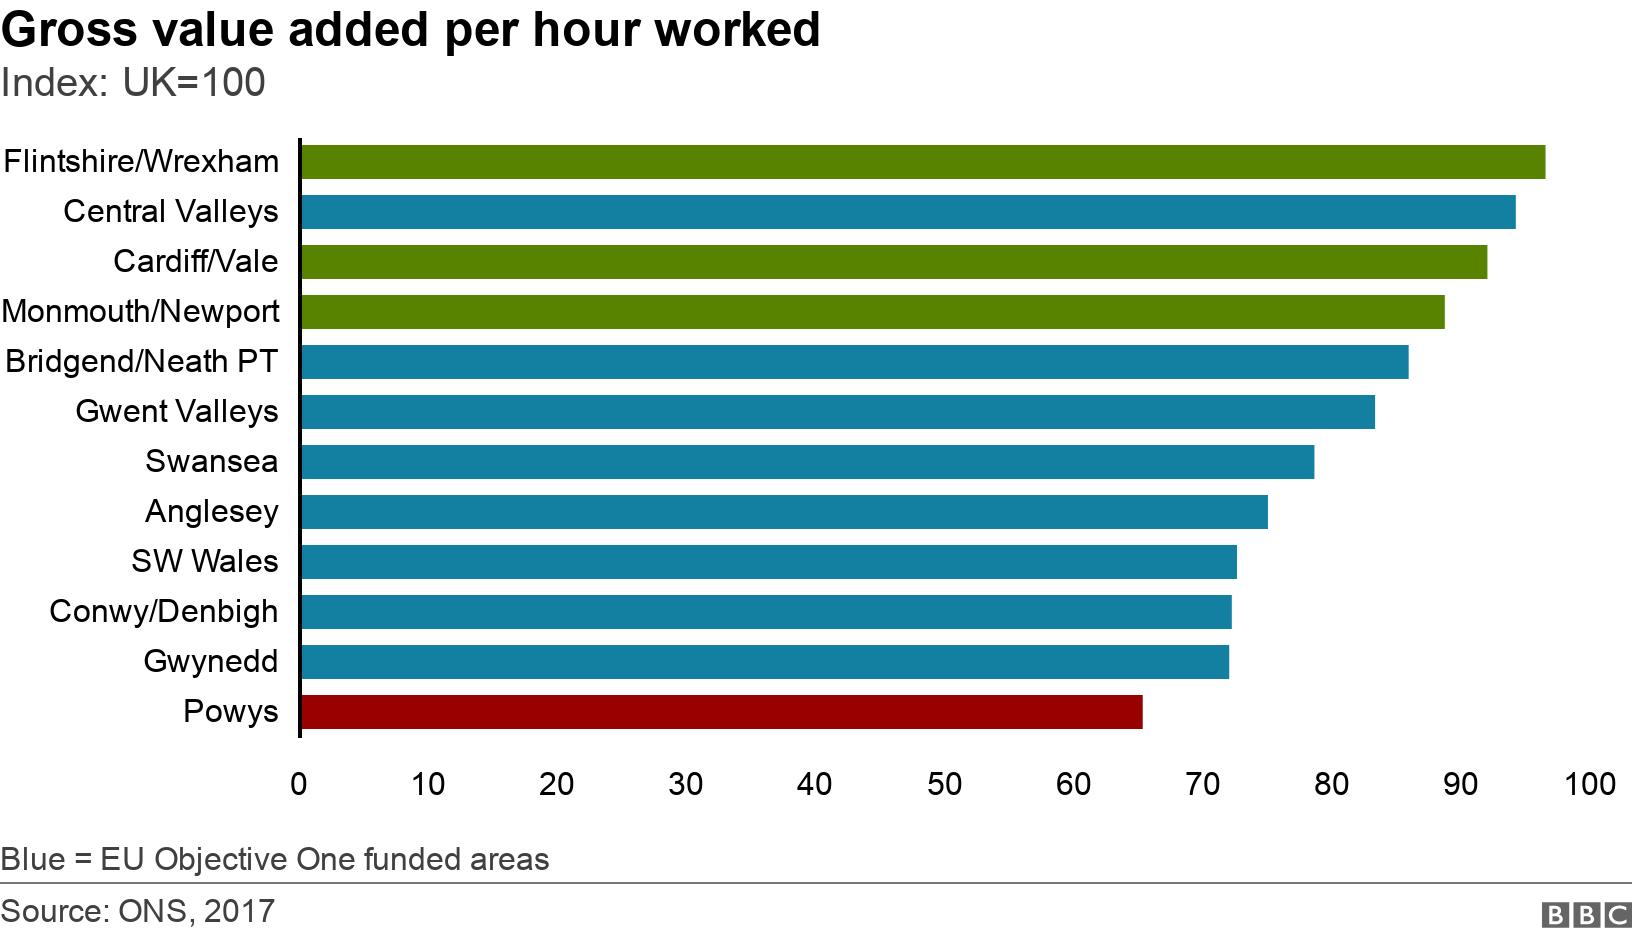 Gross value added per hour worked. Index: UK=100. Blue = EU Objective One funded areas.